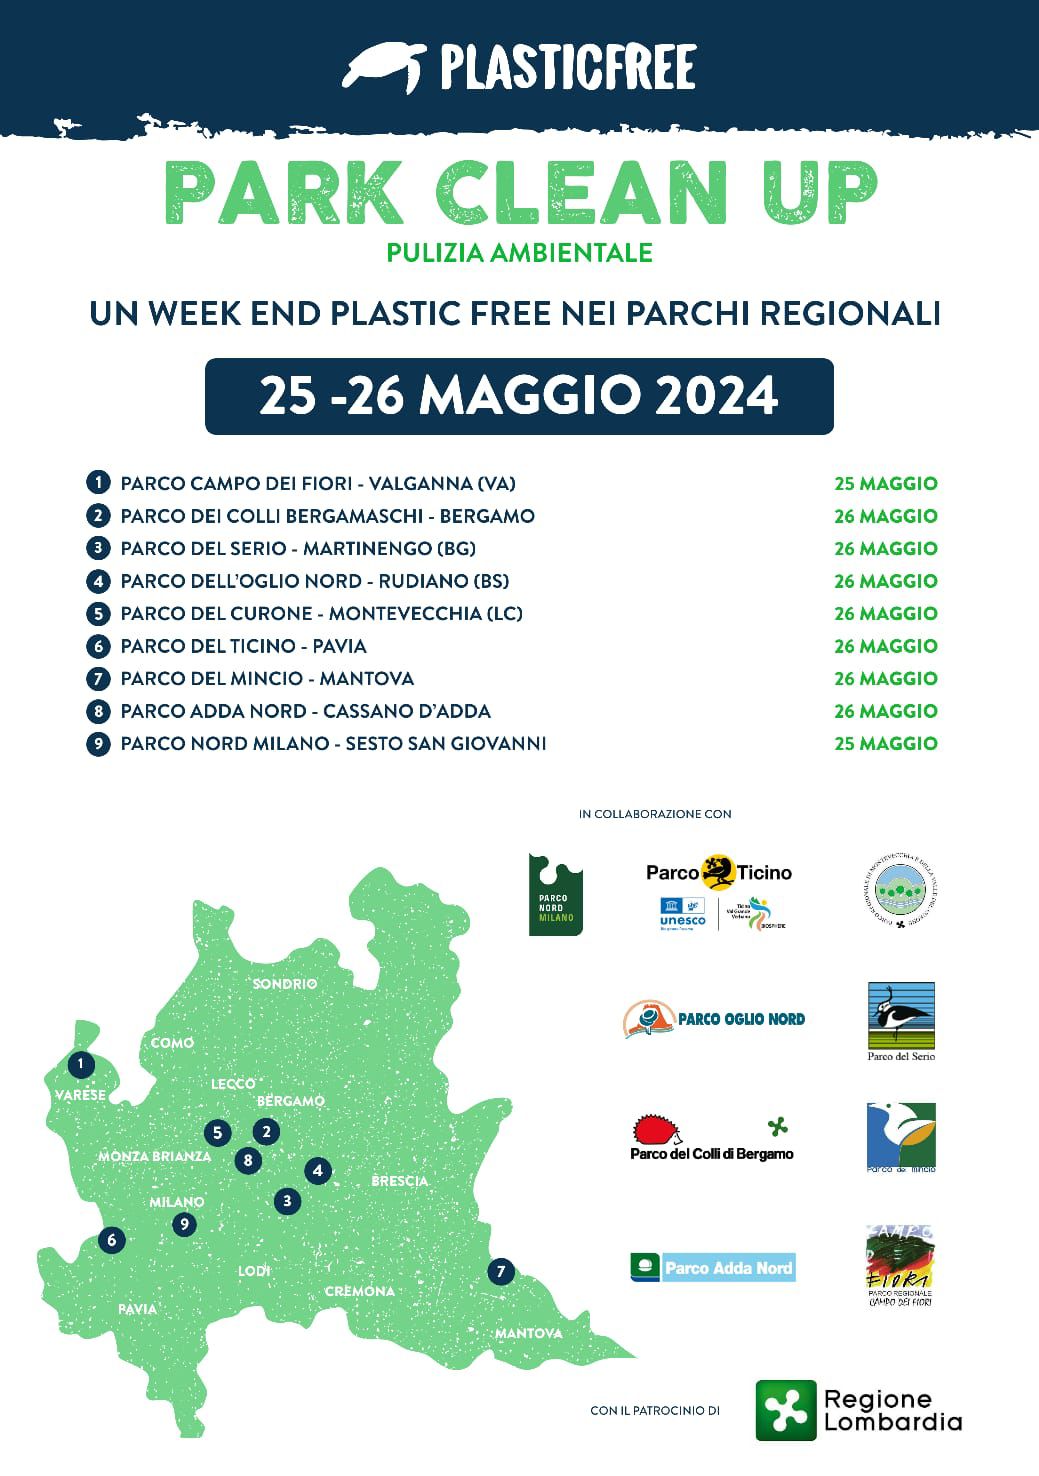 Park Clean Up in Lombardia